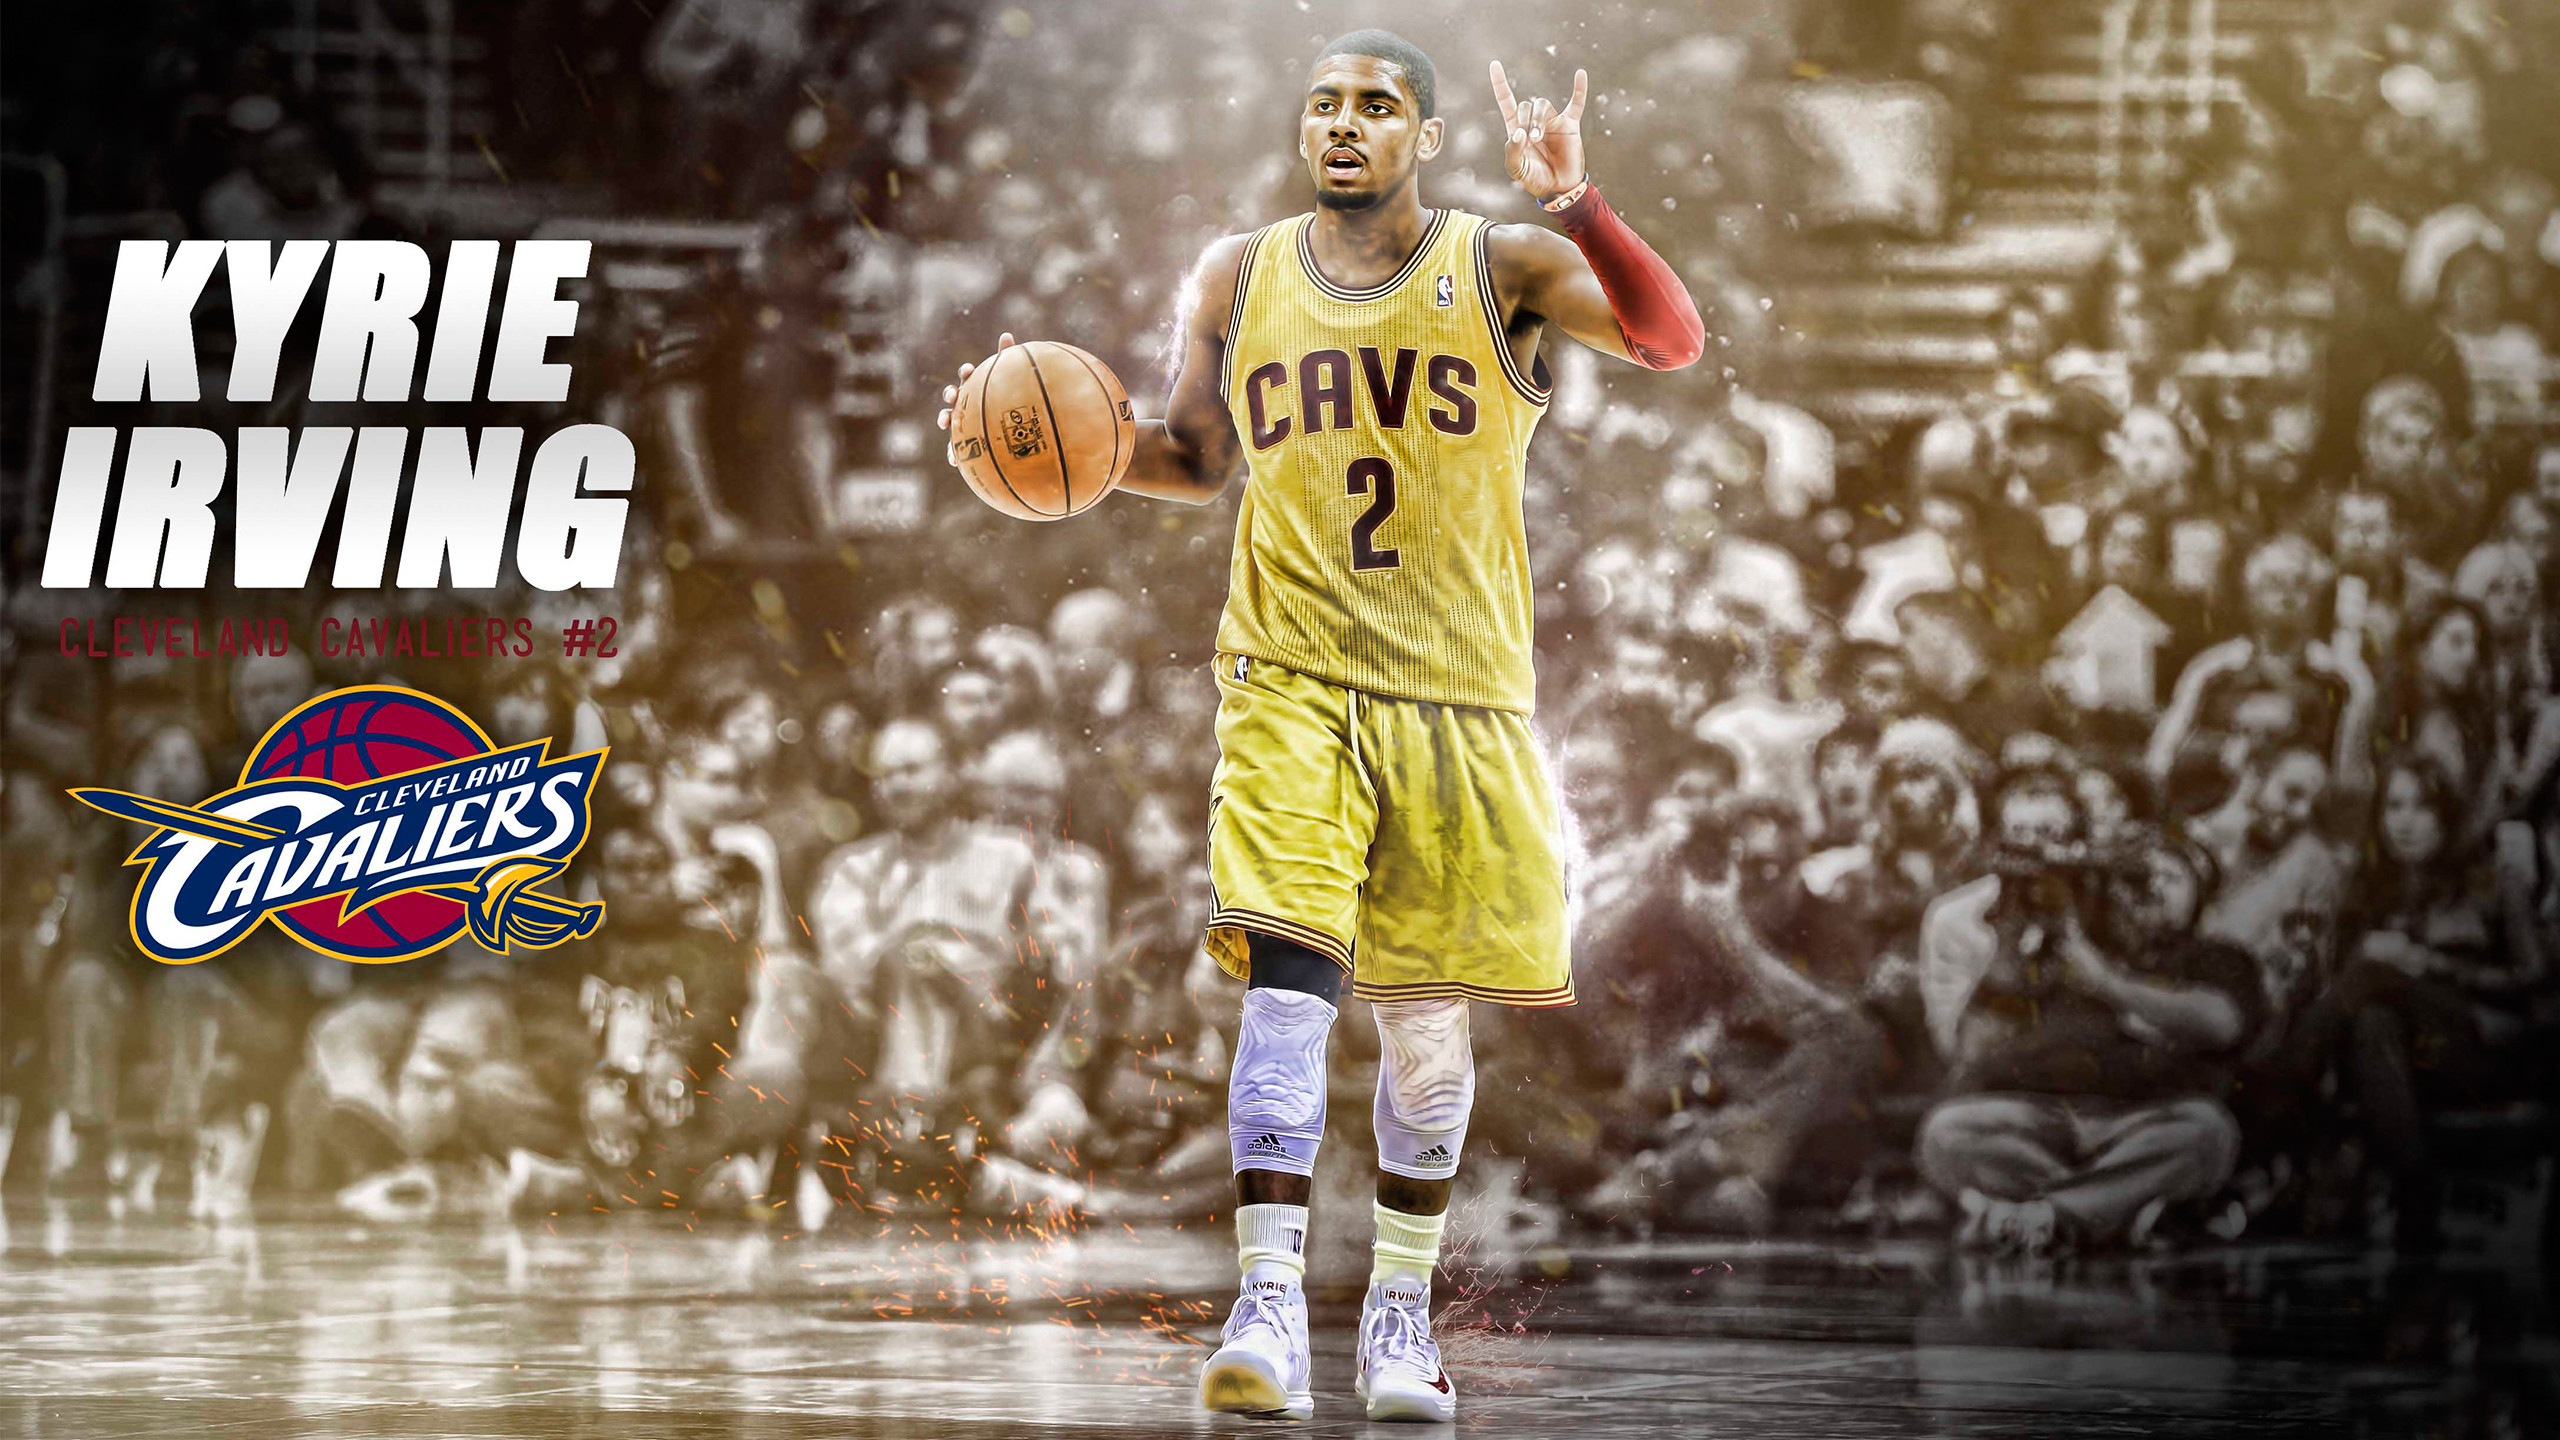 Kyrie Irving | NBA Legends | Pinterest | Cleveland, Kyrie irving and NBA